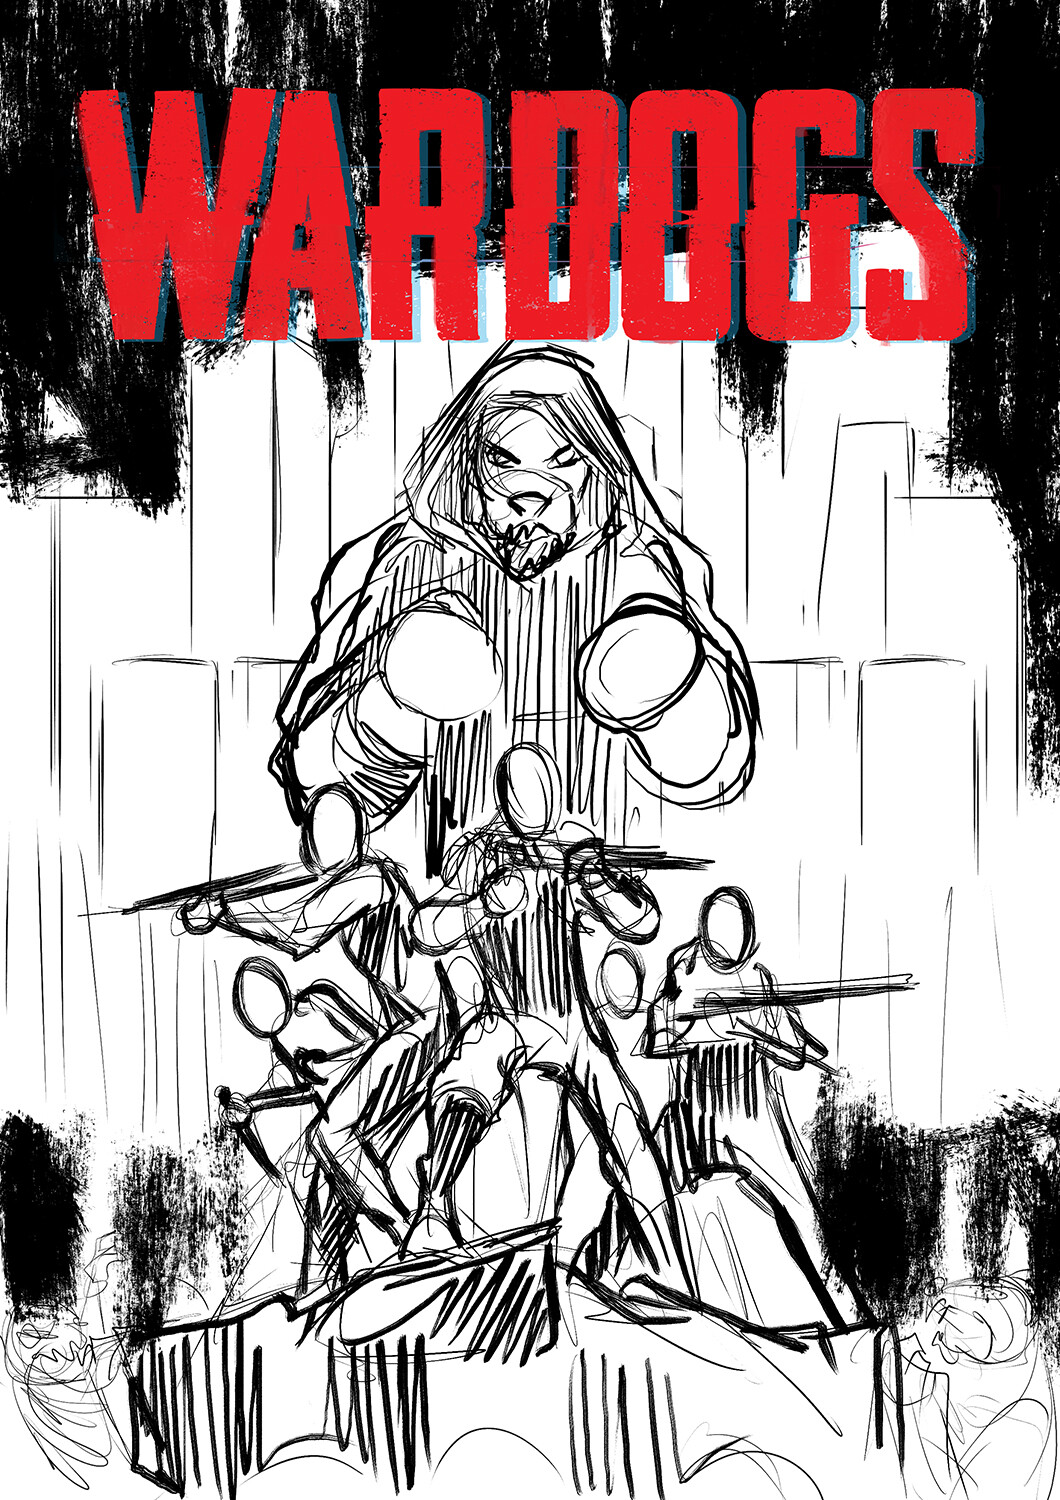 Wardogs Chronicles #1 cover sketch